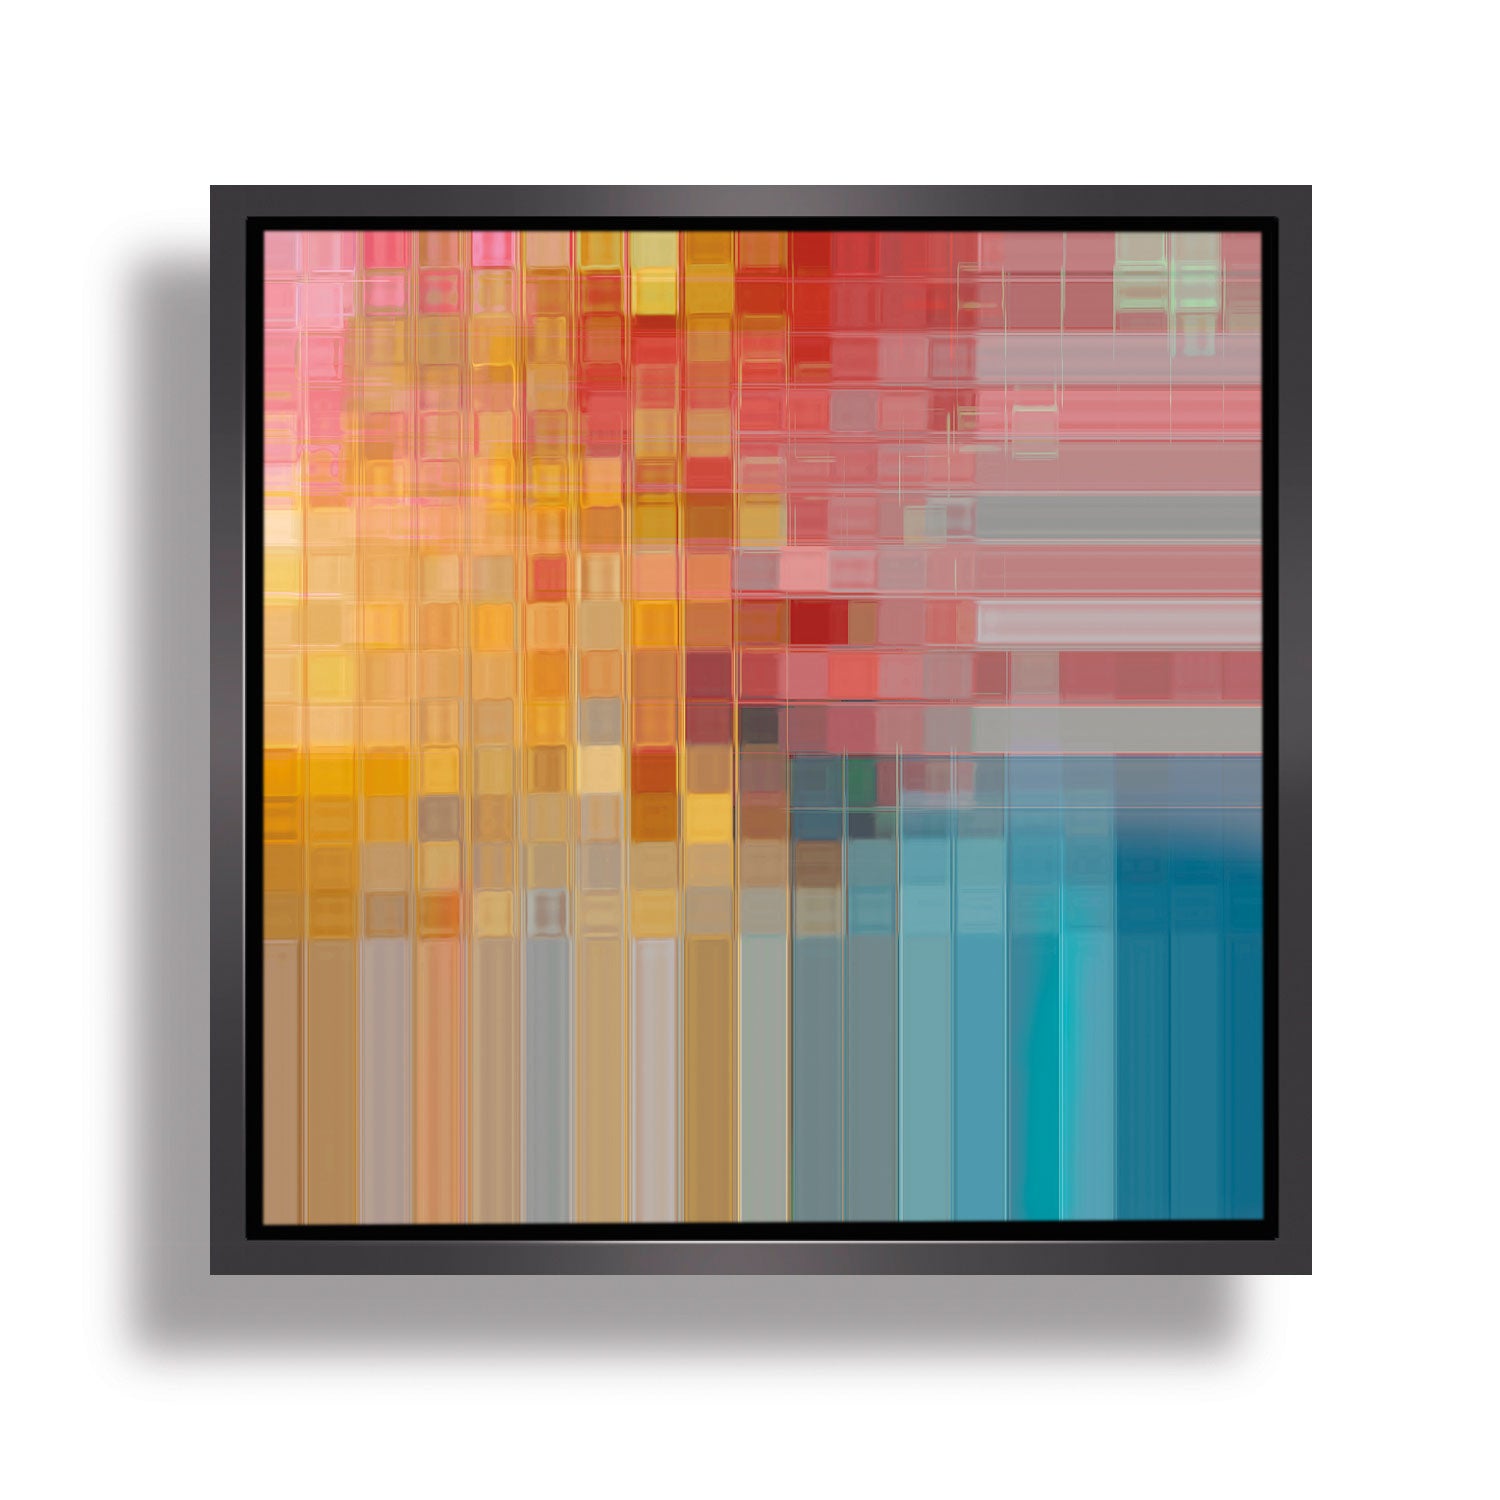 Painted squares 2 by Angella Cameron - Art Print